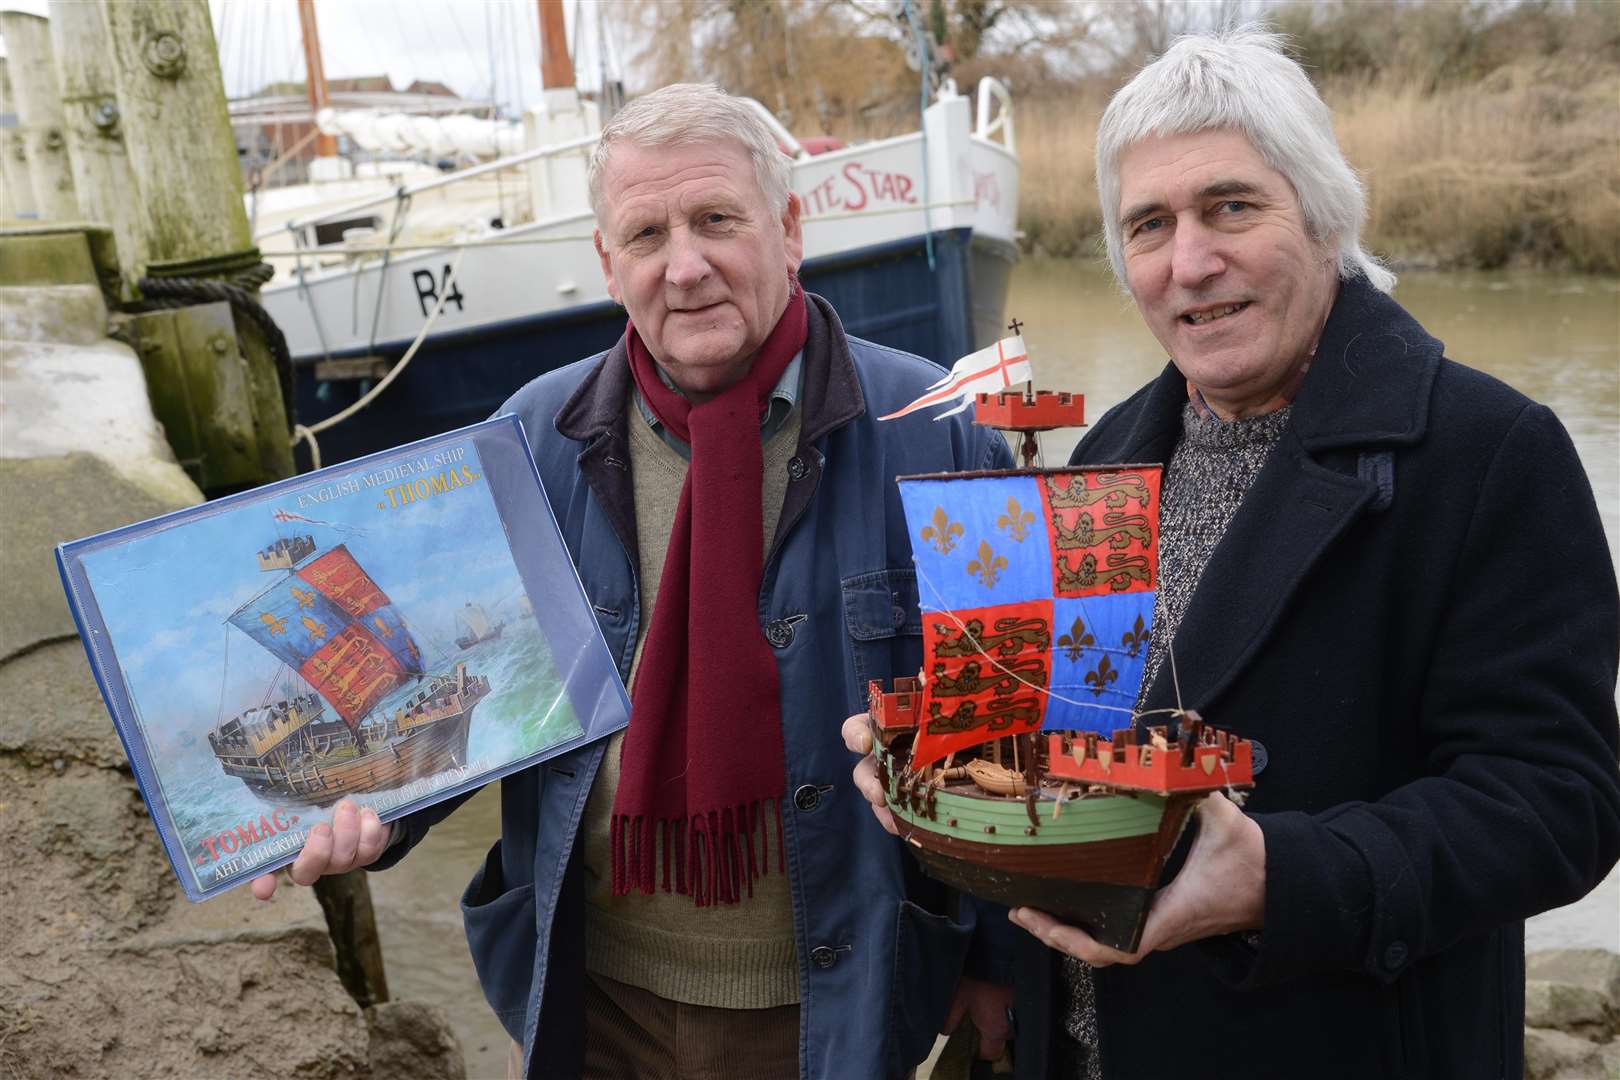 Shipwright Bob Hill and Bob Martin planned to build a medieval ship and visitor centre on Sandwich Quay together